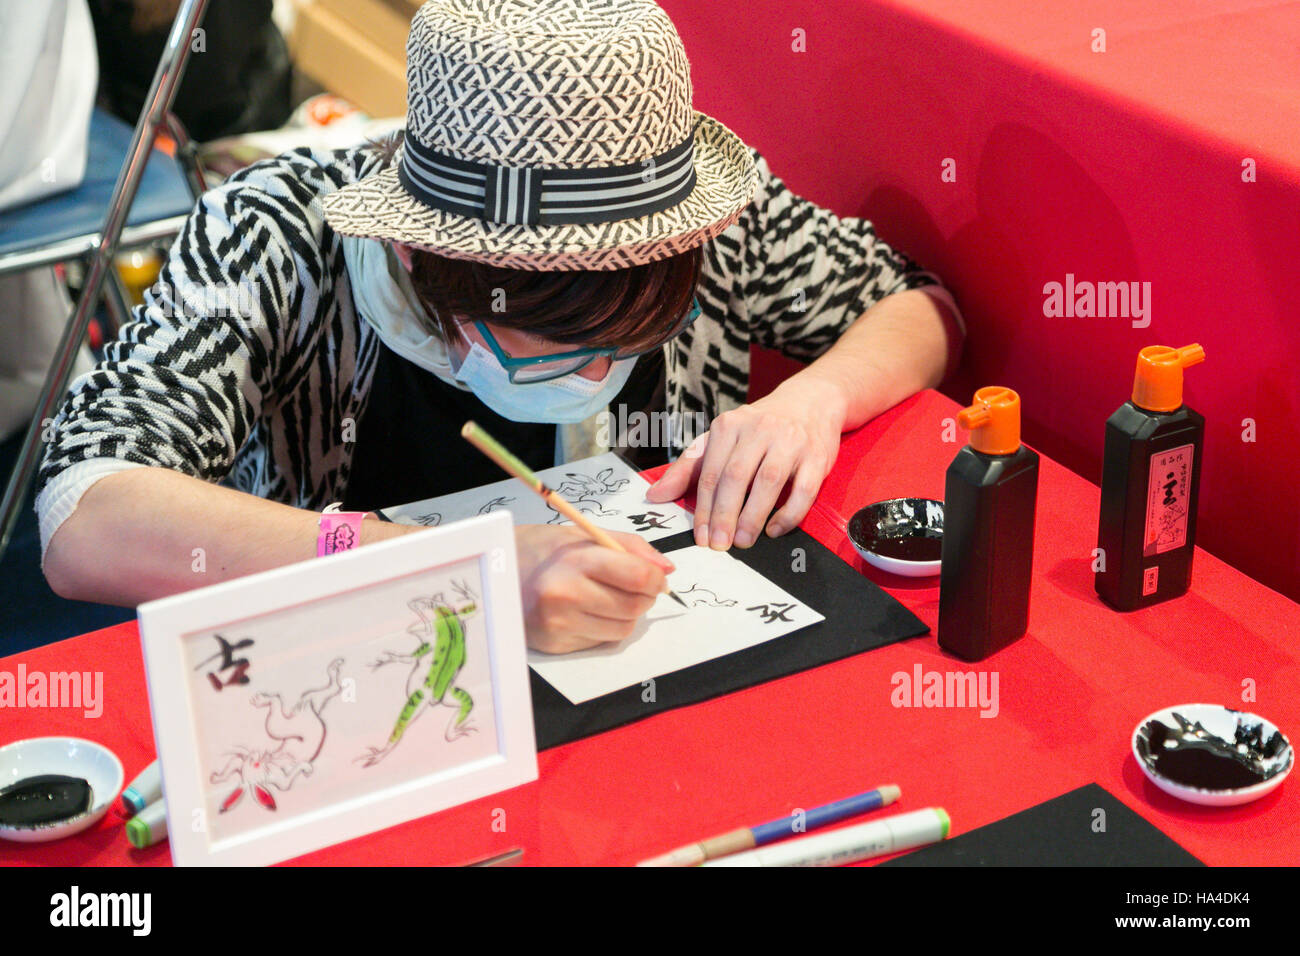 A man draws a traditional Japanese picture during the Moshi Moshi Nippon Festival 2016 on November 26, 2016 in Tokyo, Japan. Moshi Moshi Nippon Festival 2016 aims to promote Japanese pop culture (fashion, anime, technology, music and food) to the world, and non-Japanese visitors are able to enter the event for free by showing their passport. This year's two day event included live shows by Japanese pop stars Silent Siren, Dempagumi.inc, Tempura Kids, Capsule and Kyary Pamyu Pamyu at the Tokyo Metropolitan Gymnasium. © Rodrigo Reyes Marin/AFLO/Alamy Live News Stock Photo